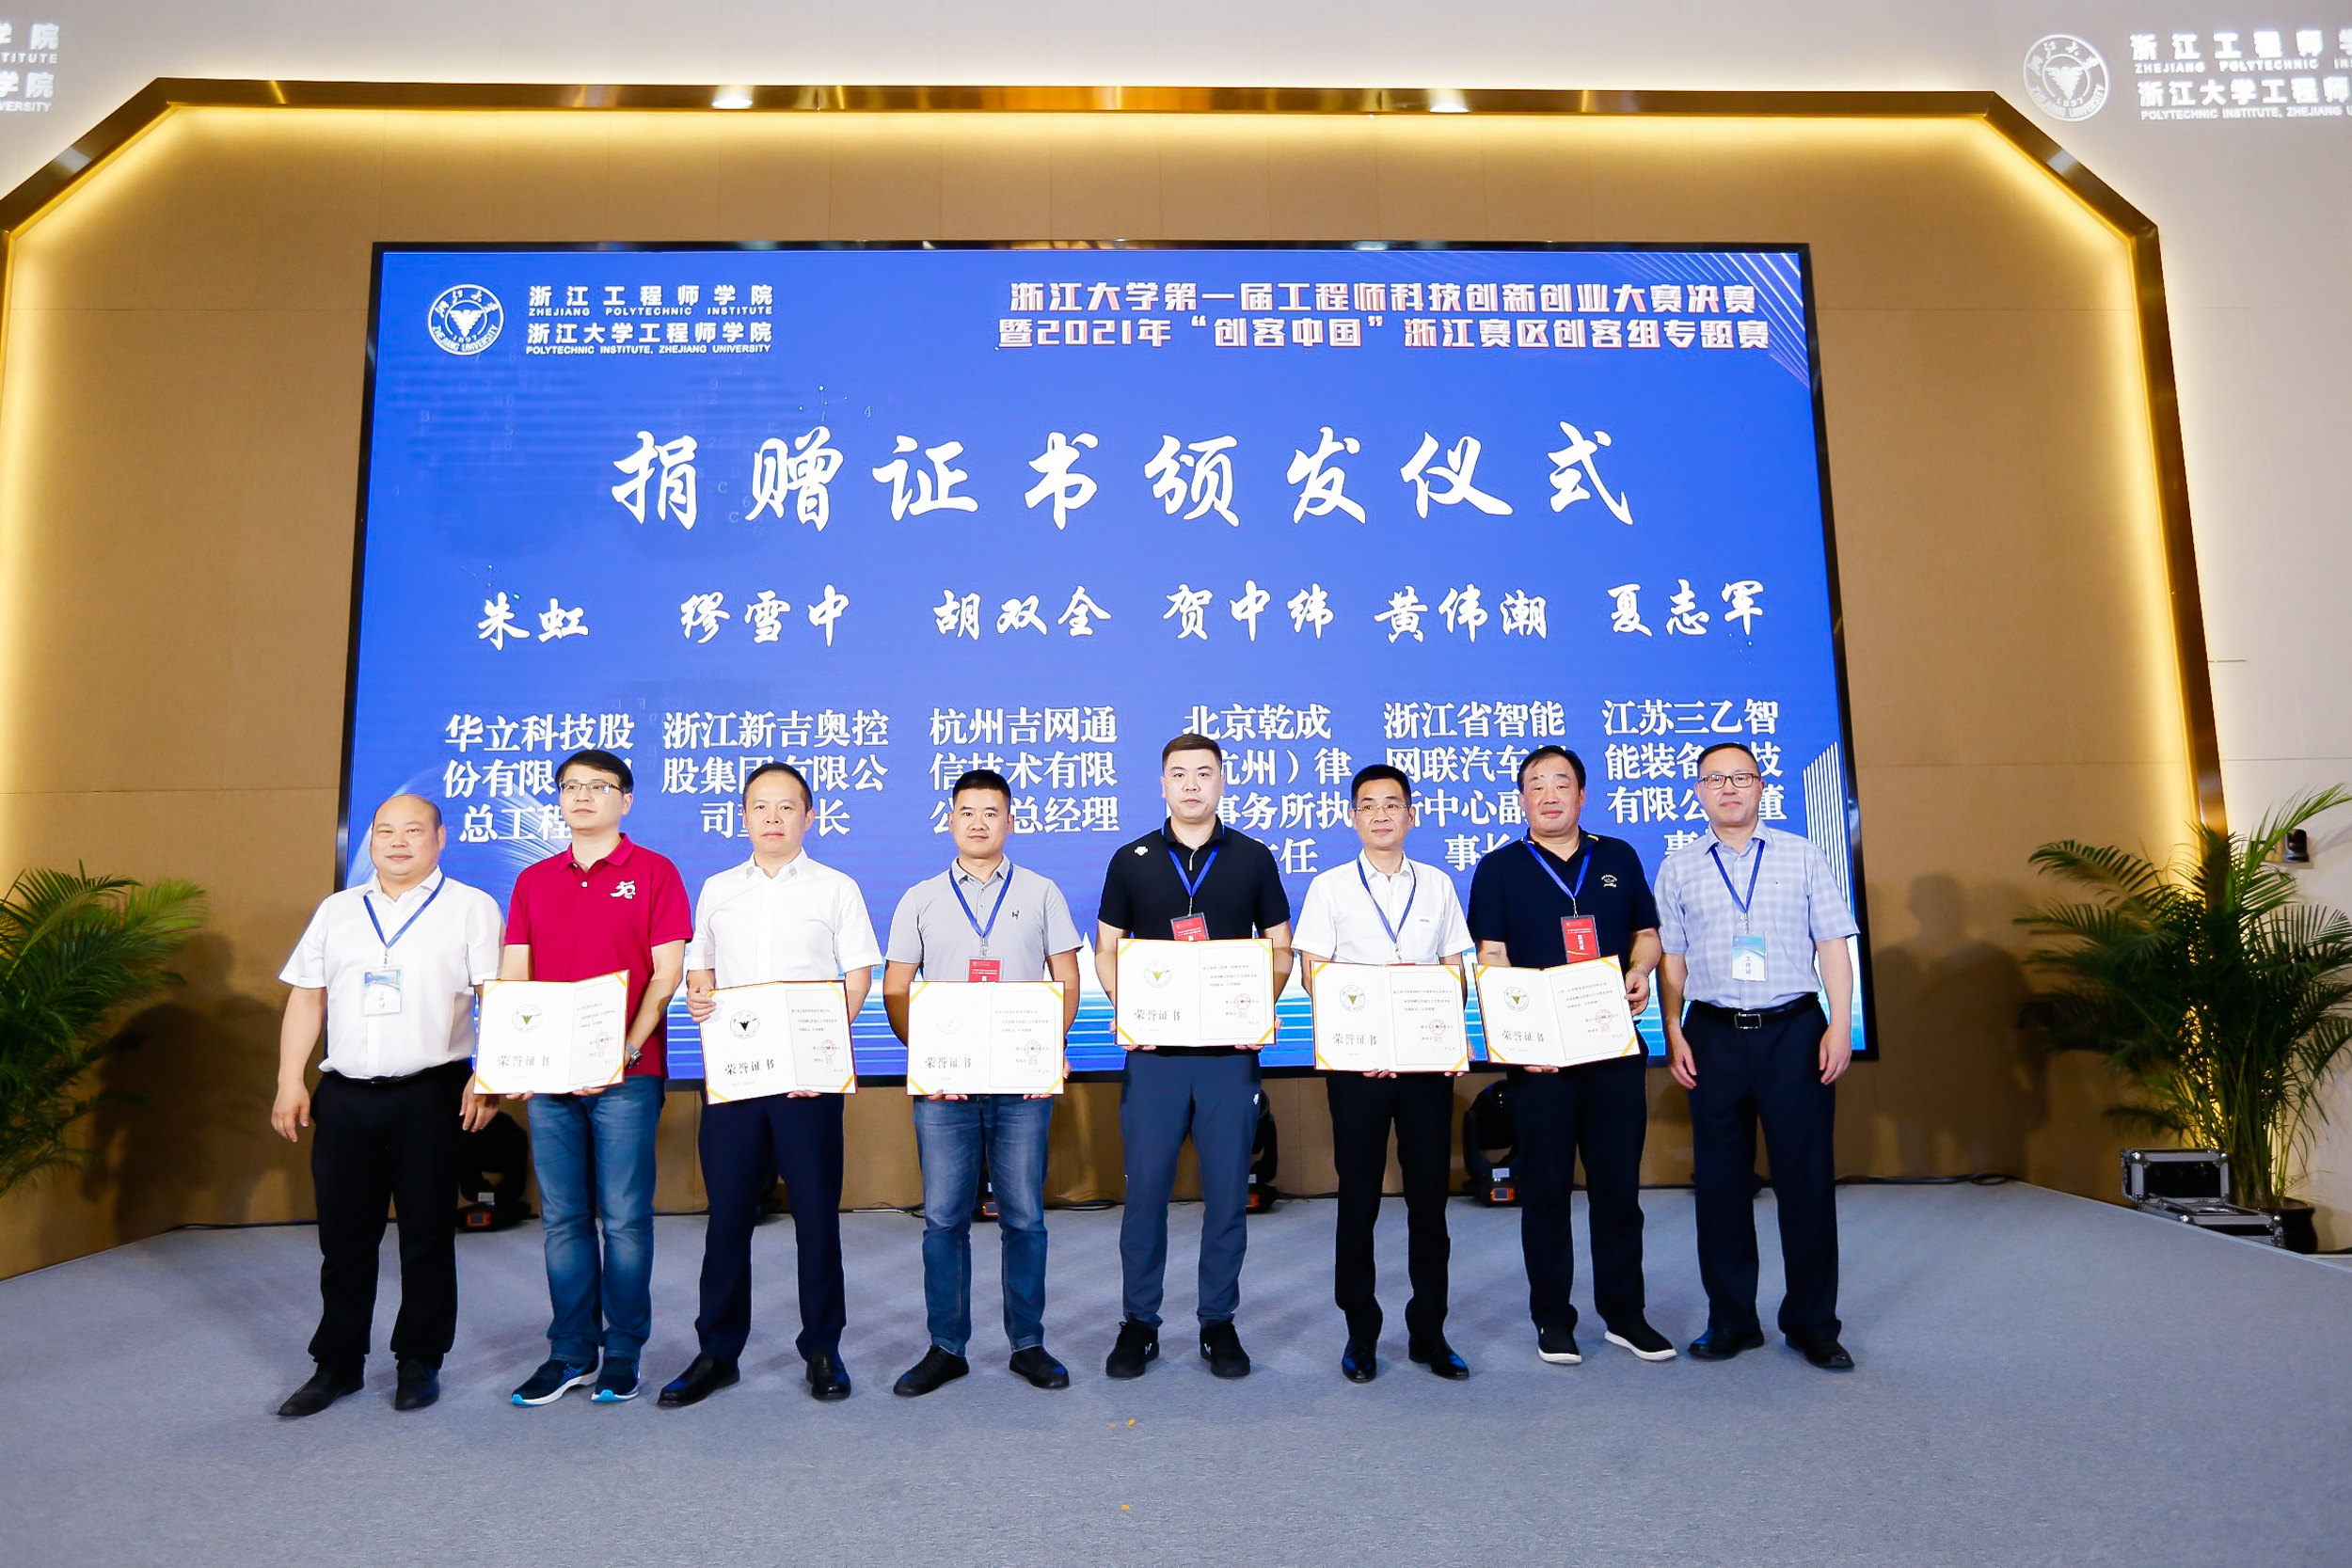 Holley Technology joins hands with Zhejiang University to start a new journey of school-enterprise cooperation